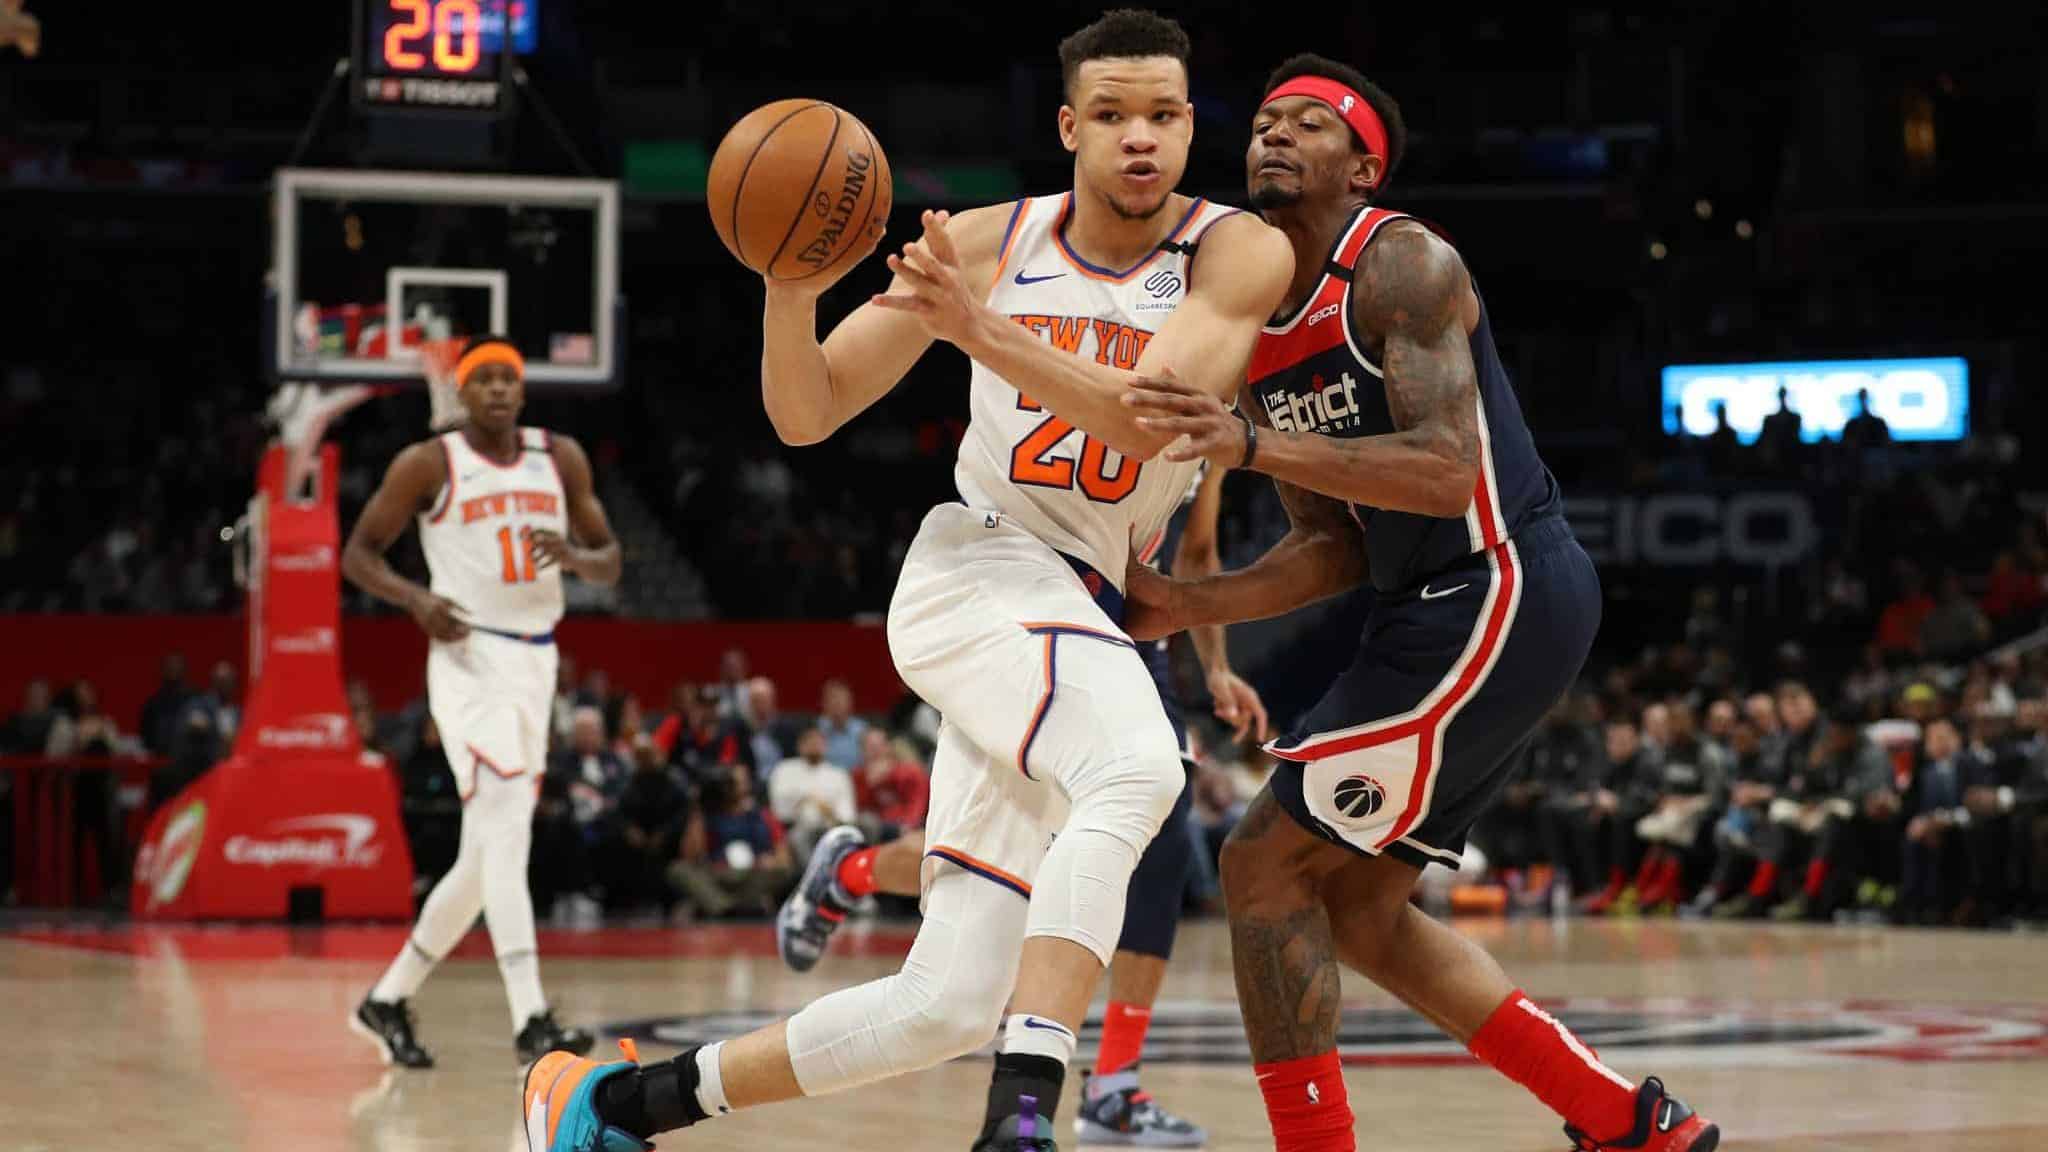 WASHINGTON, DC - MARCH 10: Kevin Knox II #20 of the New York Knicks dribbles past Bradley Beal #3 of the Washington Wizards during the first half at Capital One Arena on March 10, 2020 in Washington, DC. NOTE TO USER: User expressly acknowledges and agrees that, by downloading and or using this photograph, User is consenting to the terms and conditions of the Getty Images License Agreement.